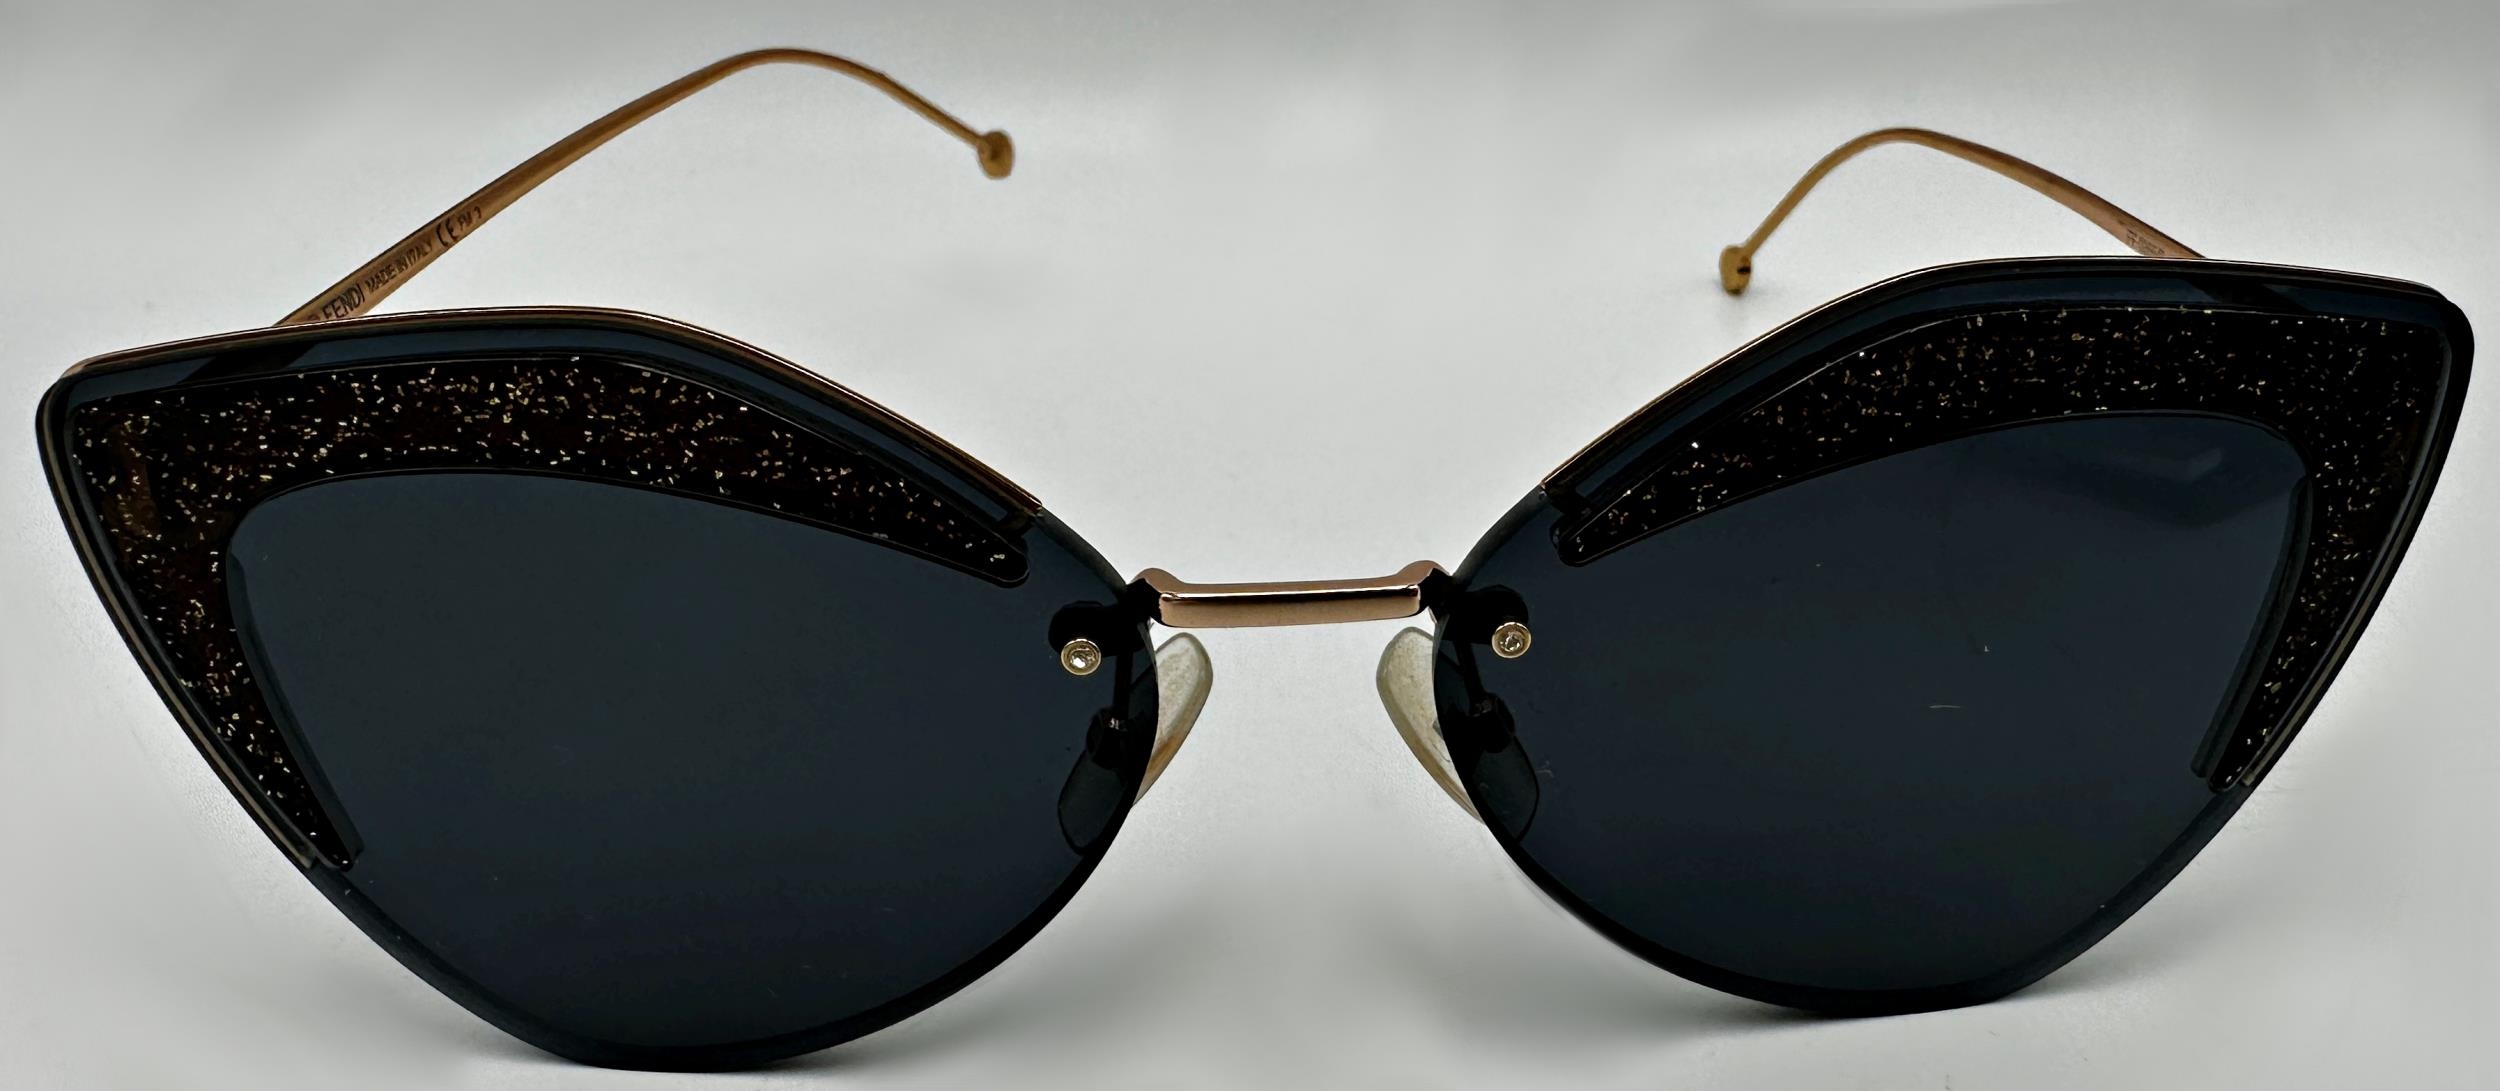 Fendi Eyewear Glittered Cat Eye Sunglasses in black and gold with branded dust cloth and case